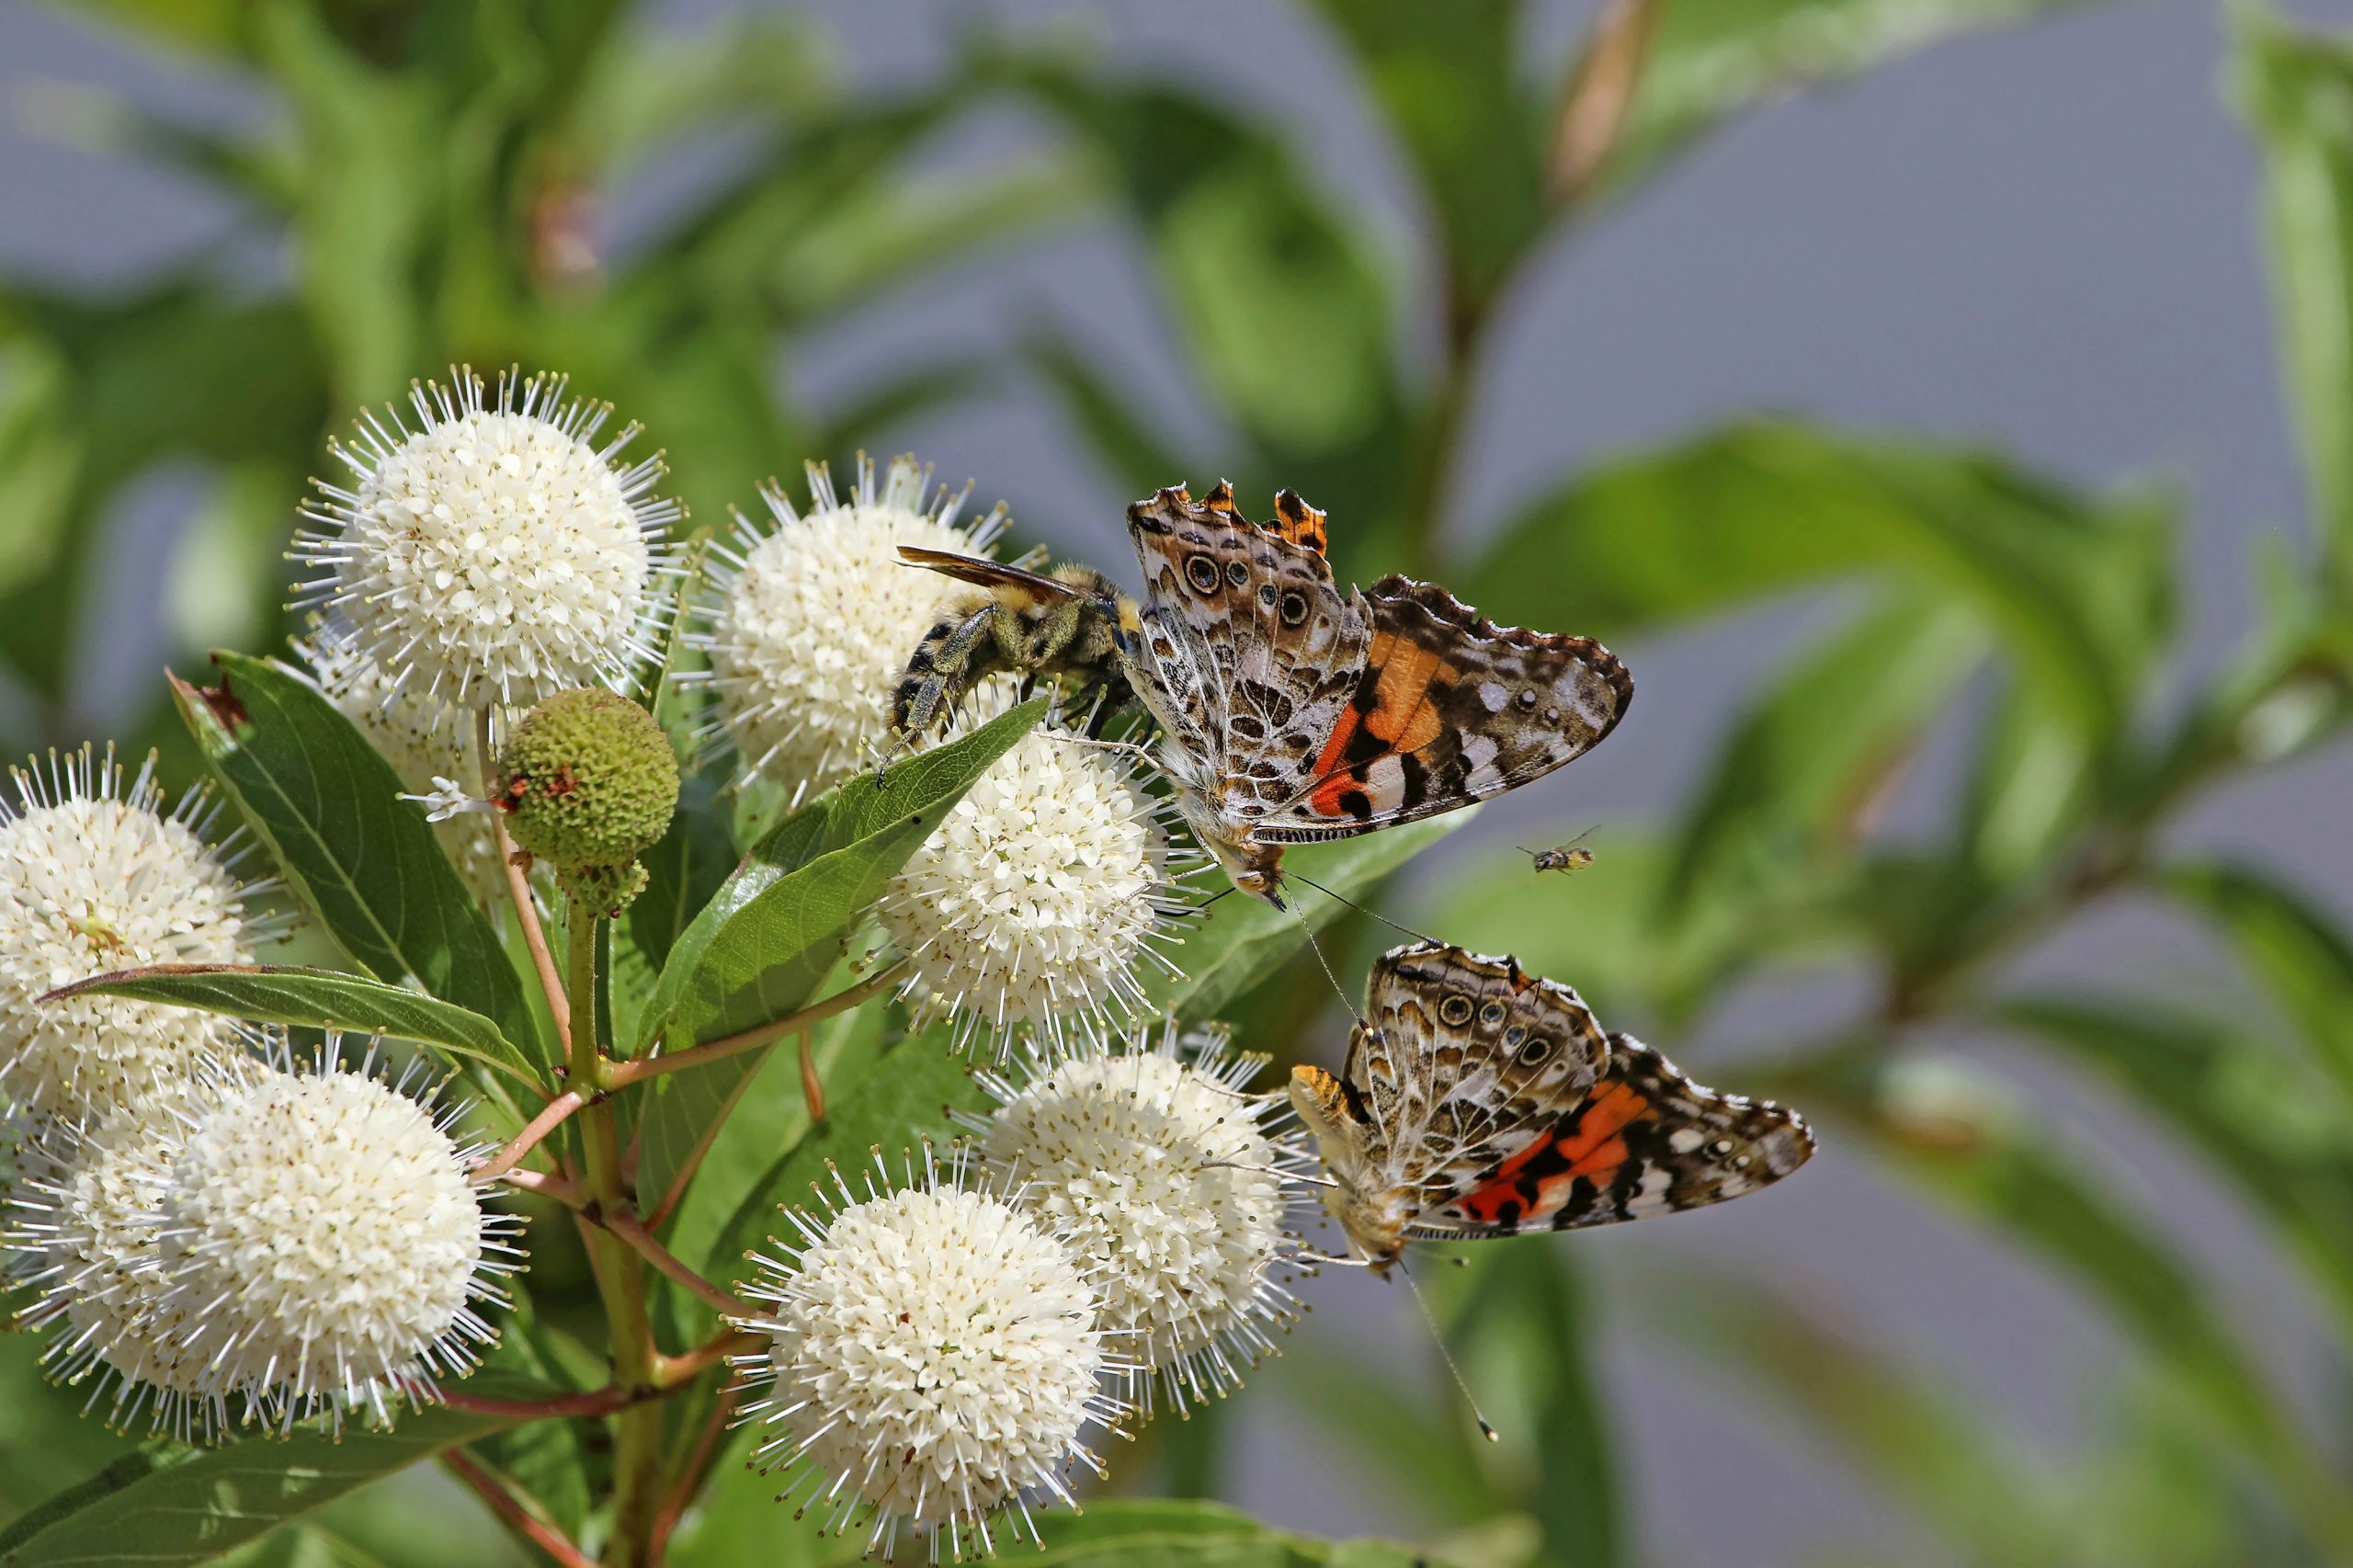 Grow Buttonbush to Attract Butterflies and Pollinators